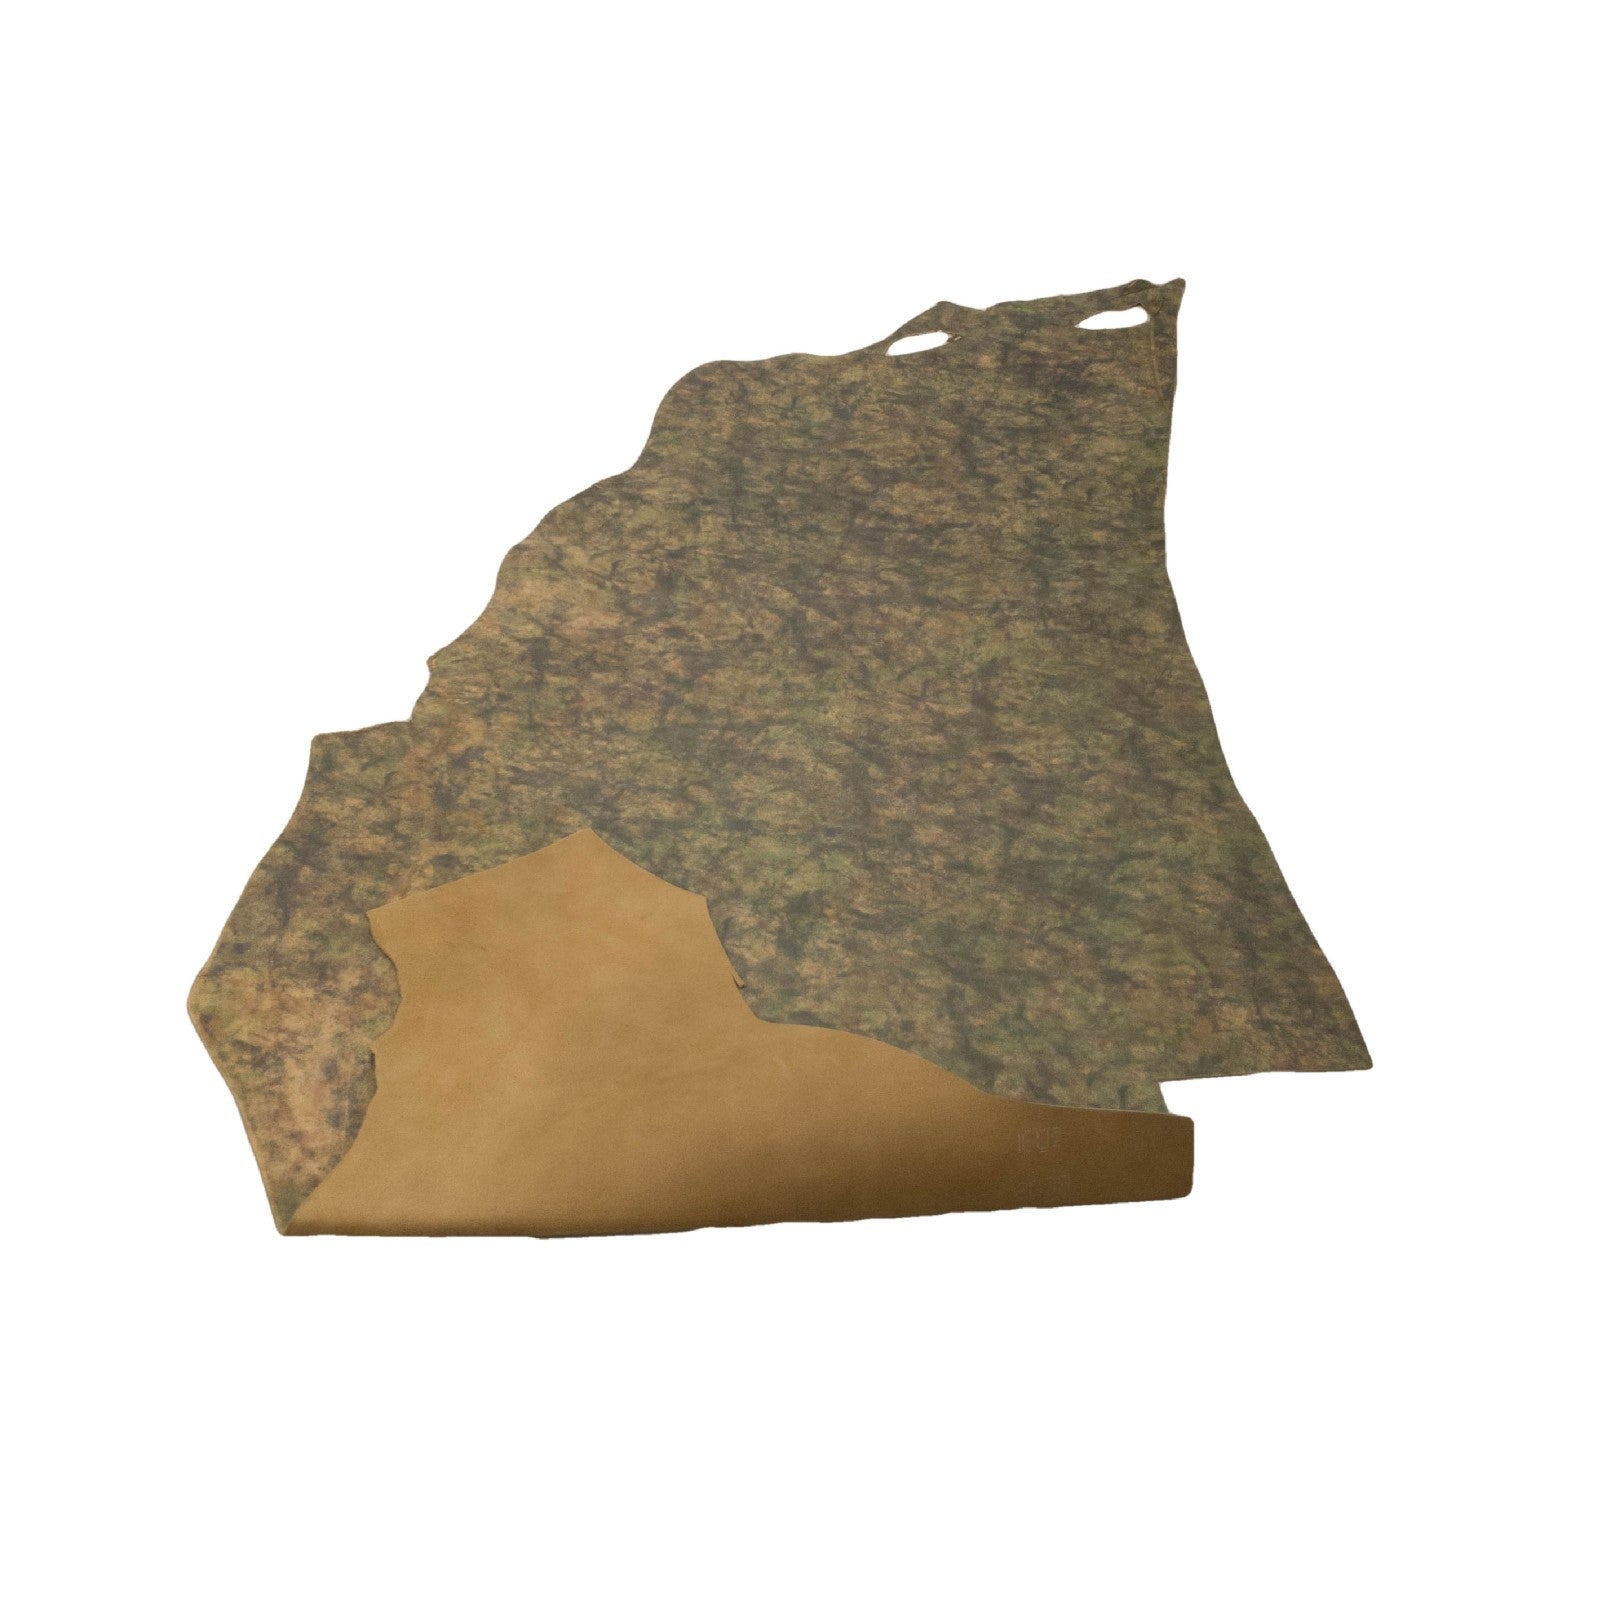 Green Camo,  15-26 Sq Ft 5-6 oz, Oil Tanned Sides,  | The Leather Guy